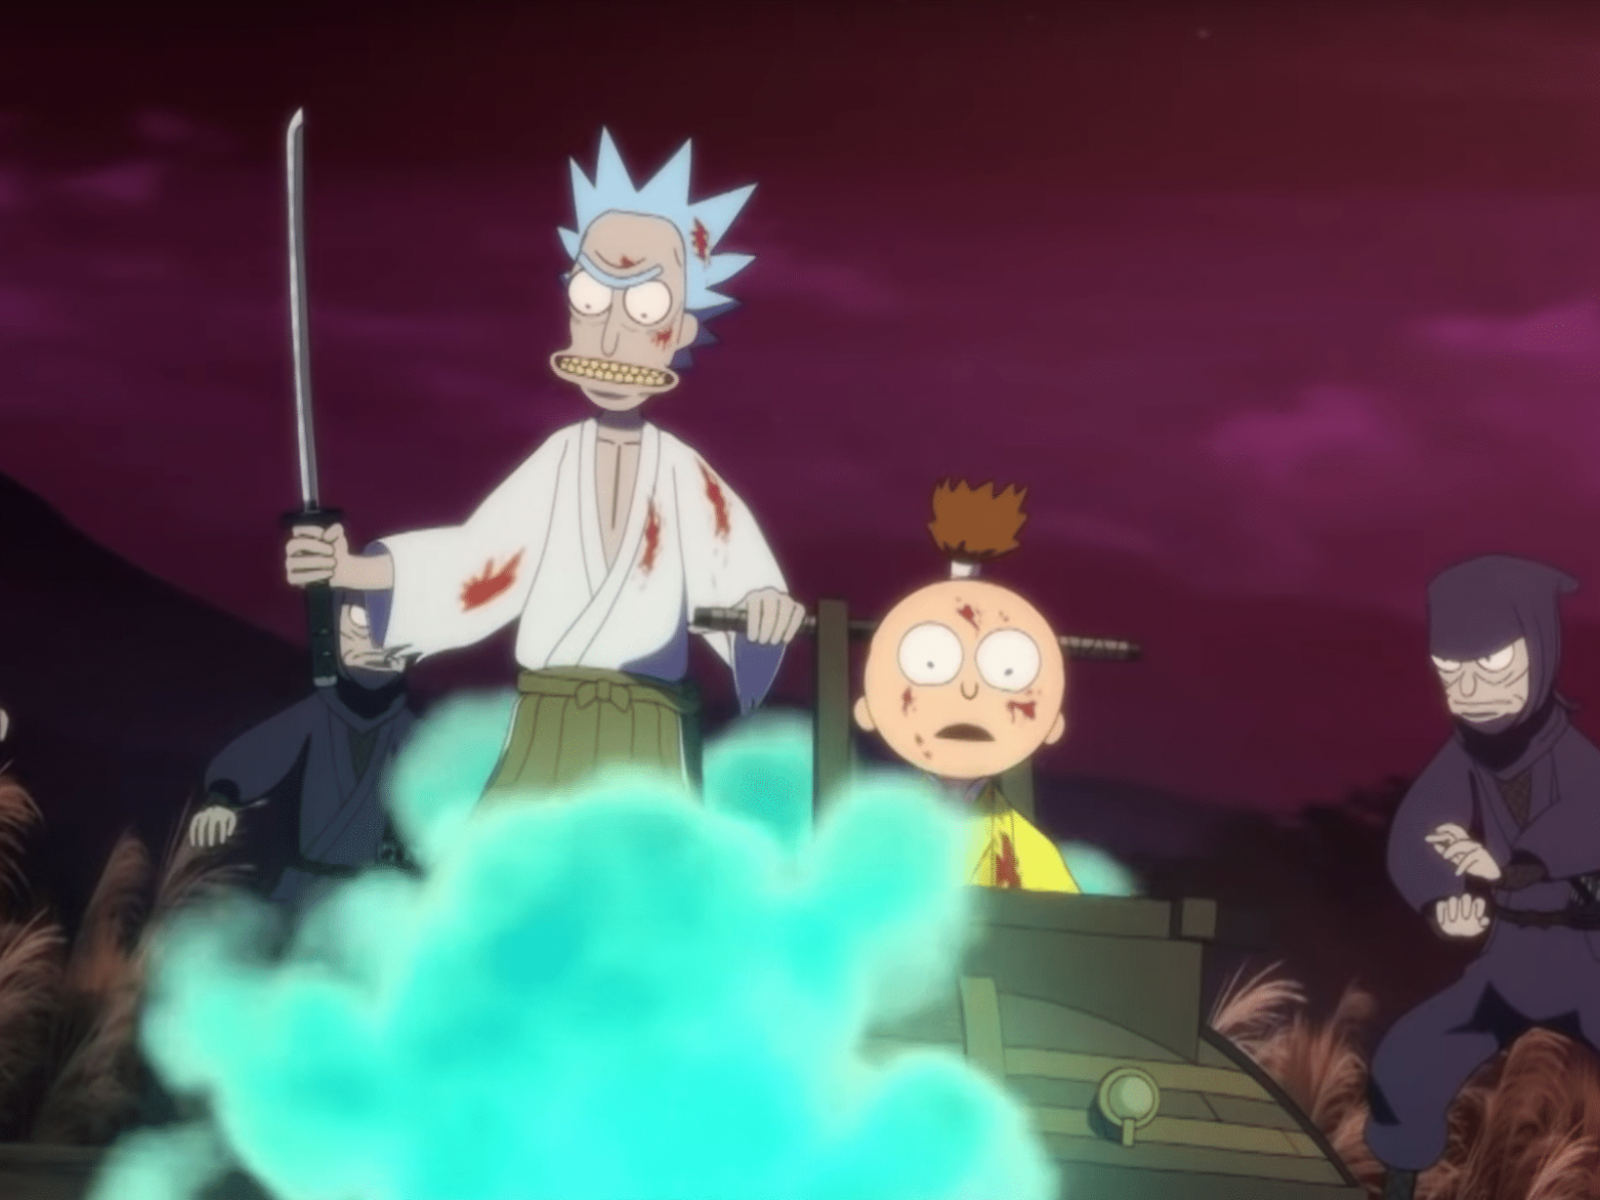 Rick and Morty: The Anime - streaming online